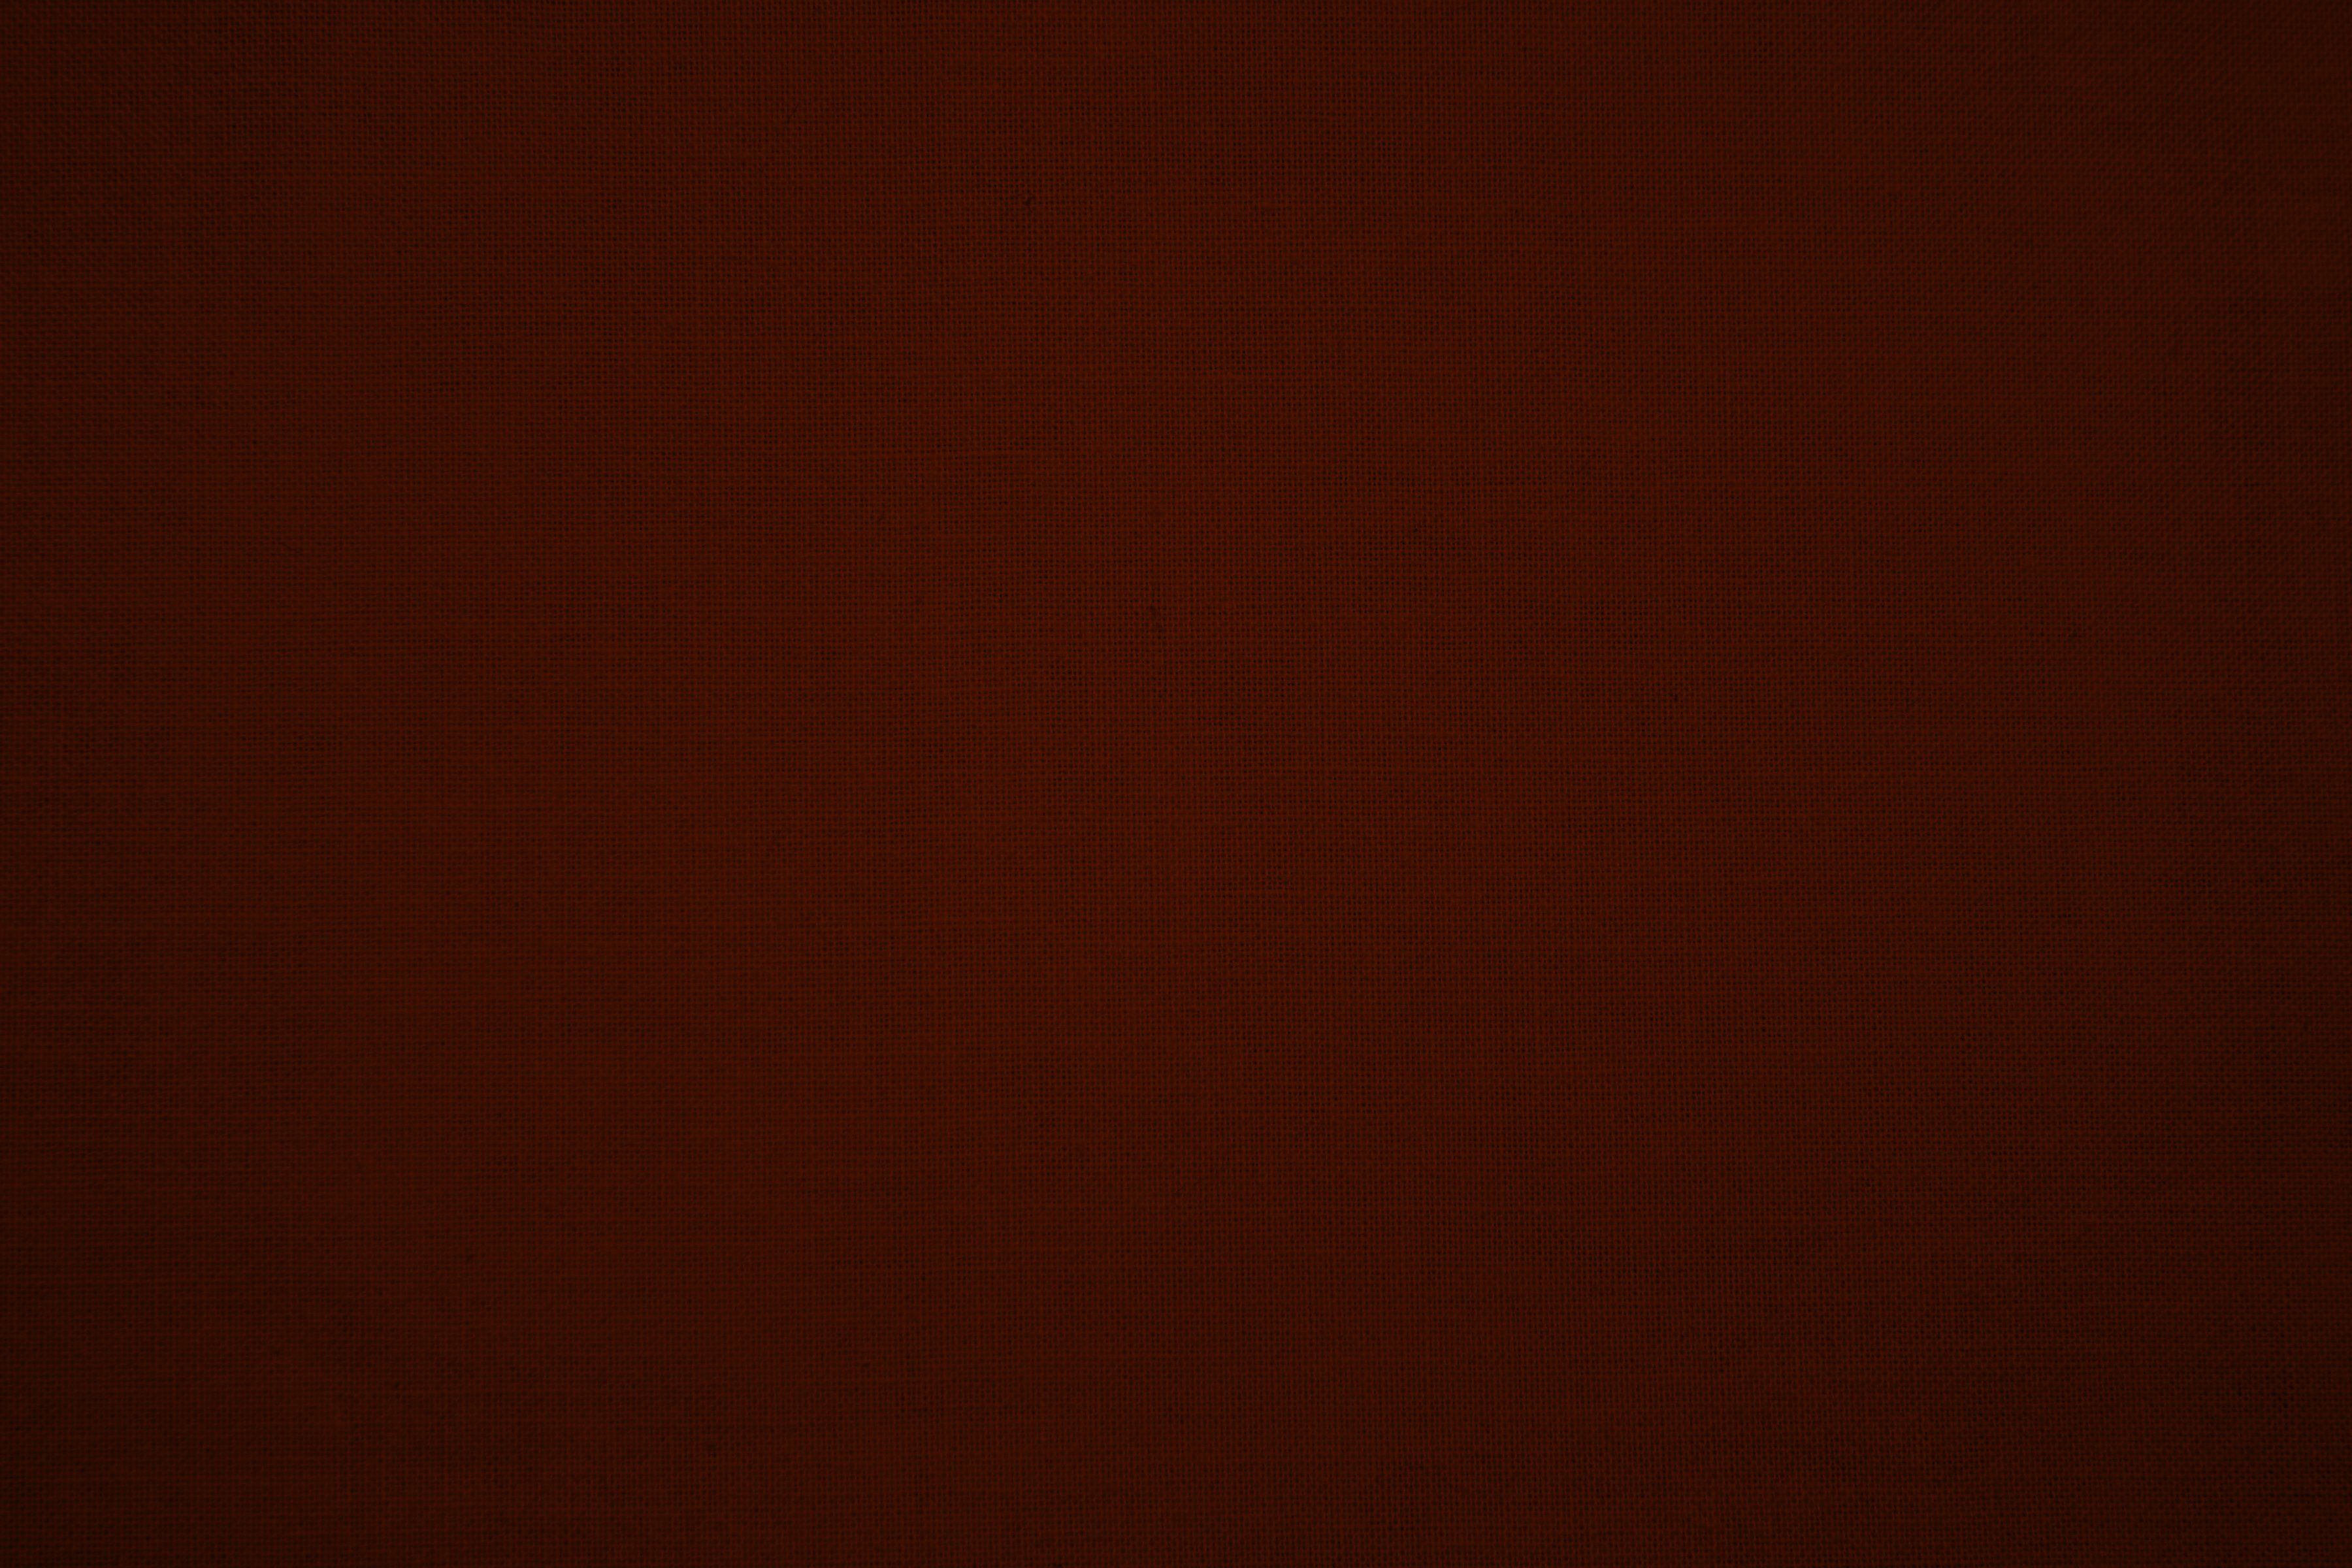 Dark Red Canvas Fabric Texture Picture | Free Photograph | Photos ...